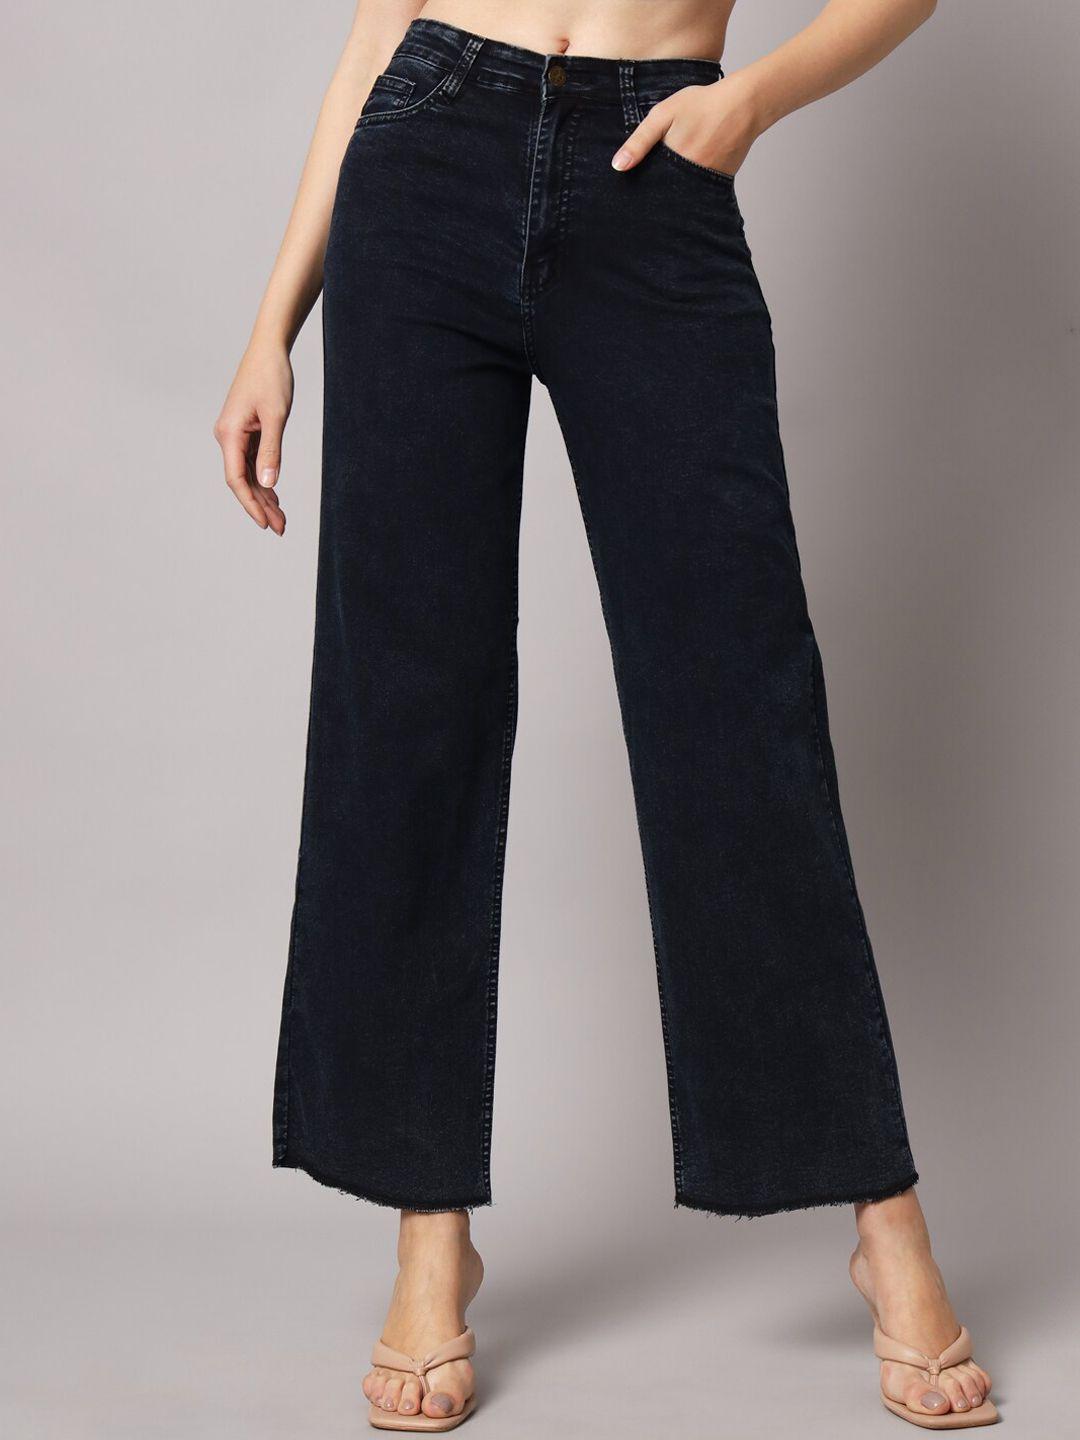 baesd-women-flared-high-rise-cropped-cotton-jeans